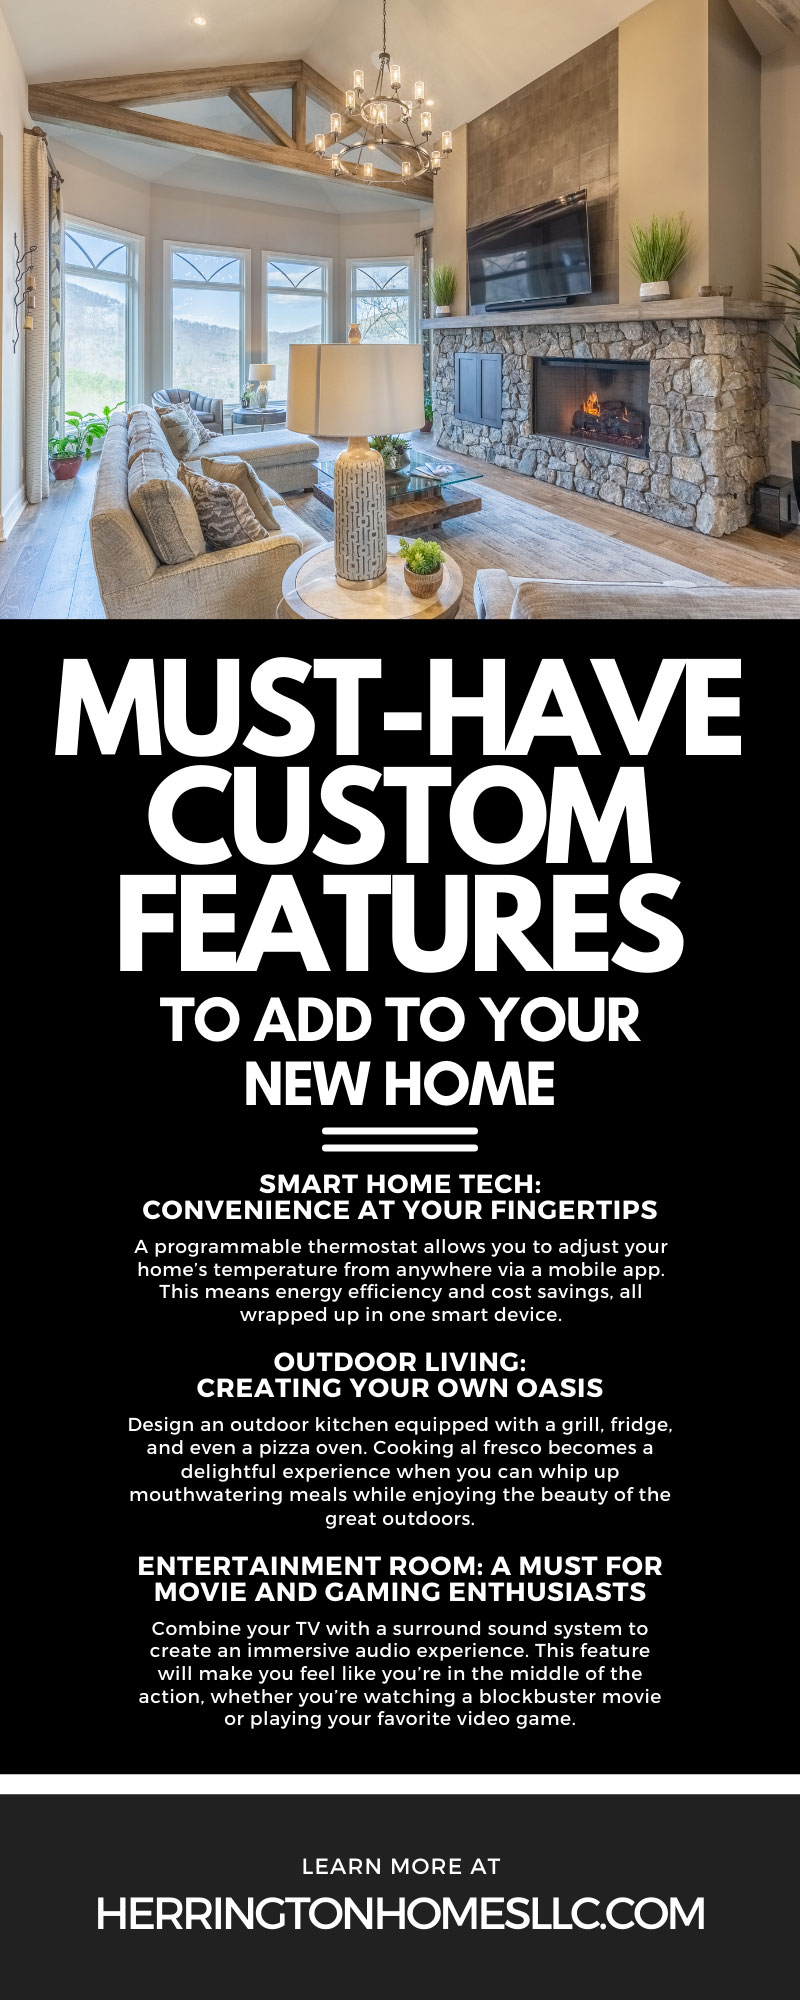 6 Must-Have Custom Features To Add to Your New Home